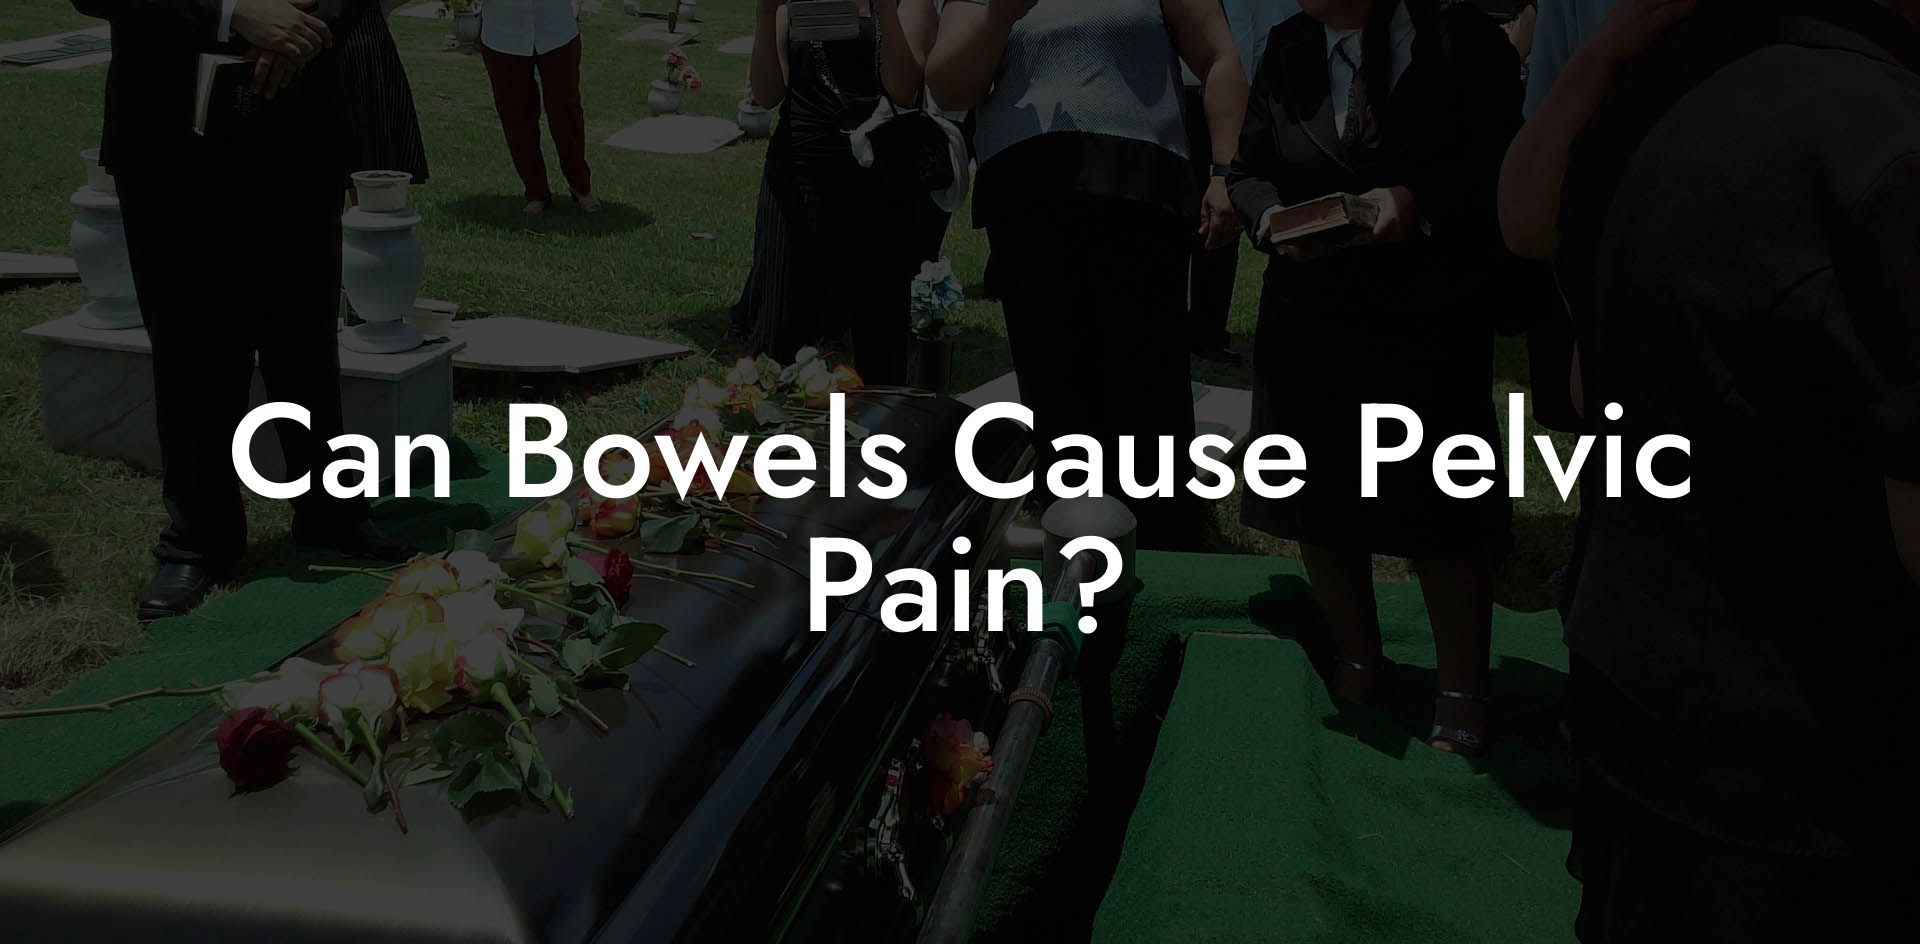 Can Bowels Cause Pelvic Pain?